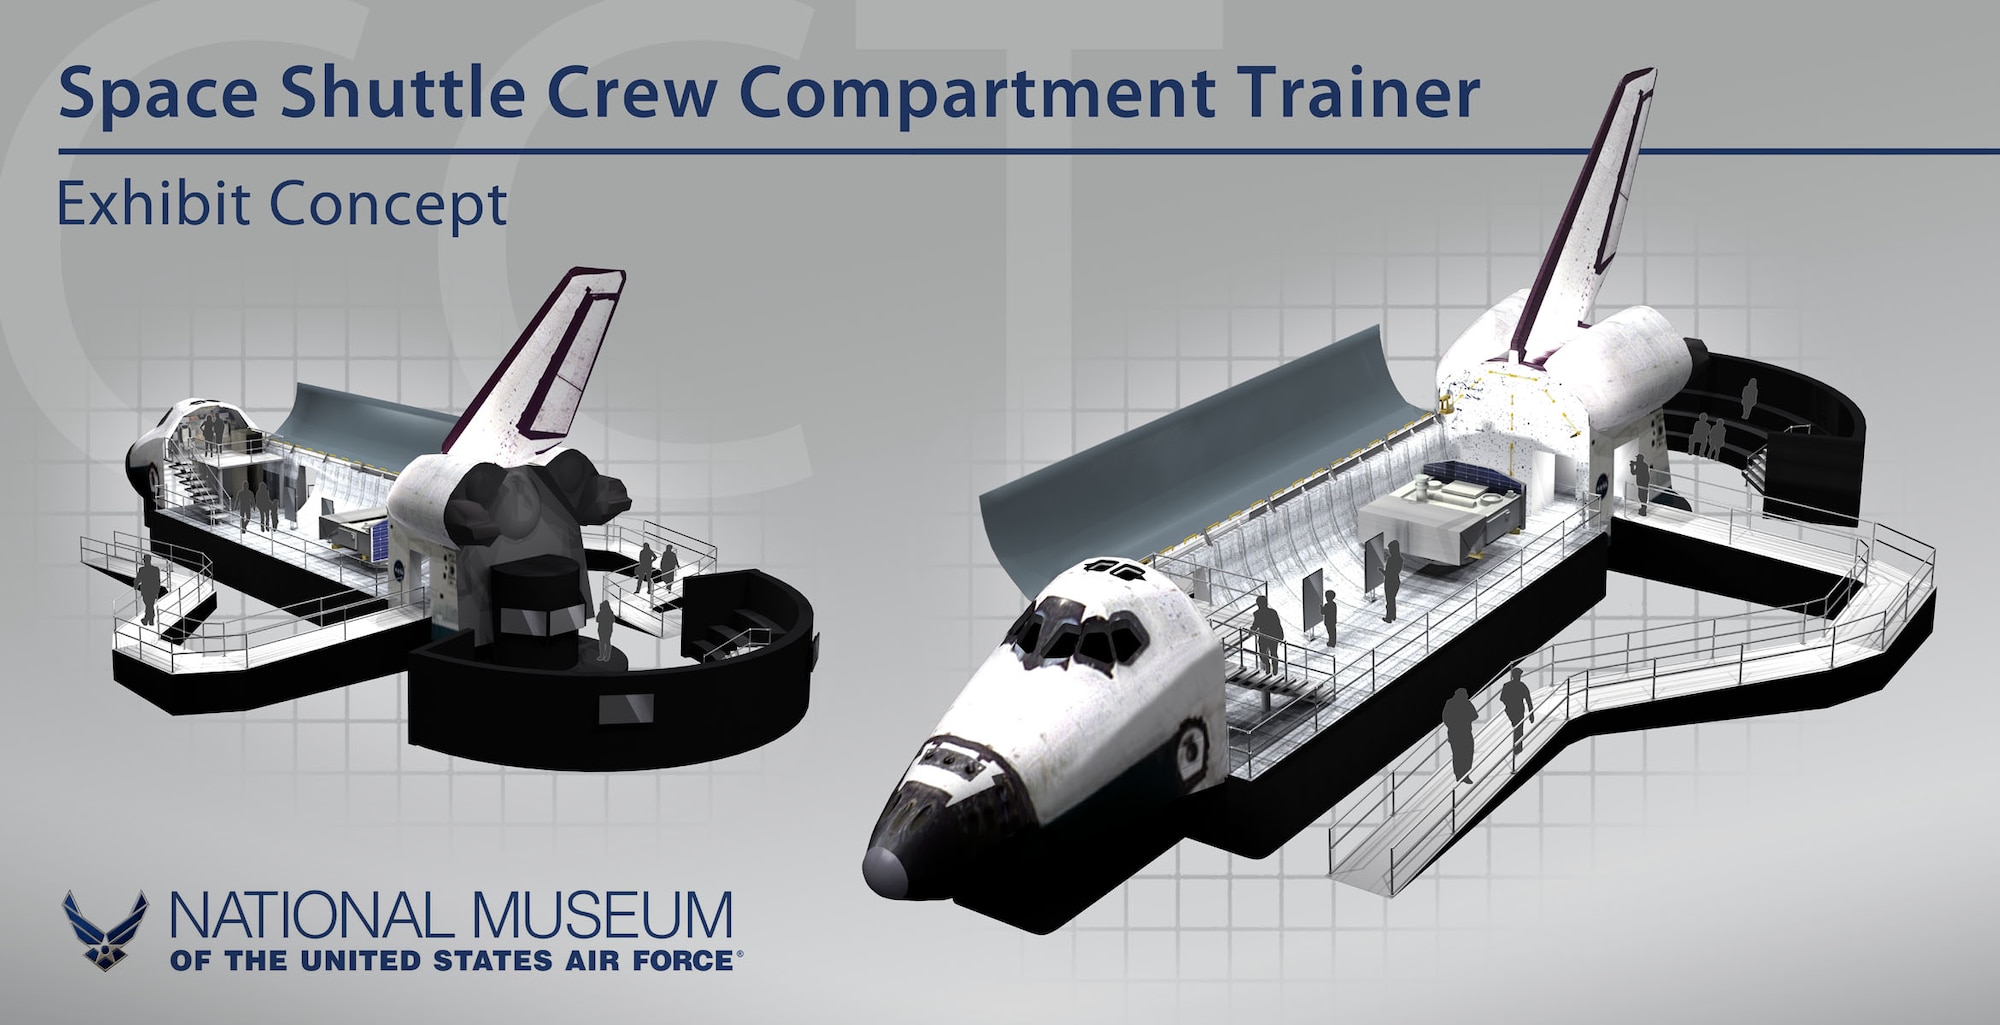 A NASA space shuttle crew compartment trainer, shown in this conceptual drawing, will be exhibited starting in the summer of 2012 at the National Museum of the U.S. Air Force in Dayton, Ohio. The CCT is a high-fidelity representation of the Space Shuttle Orbiter crew station that was used primarily for on-orbit crew training and engineering evaluations. (U.S. Air Force graphic)